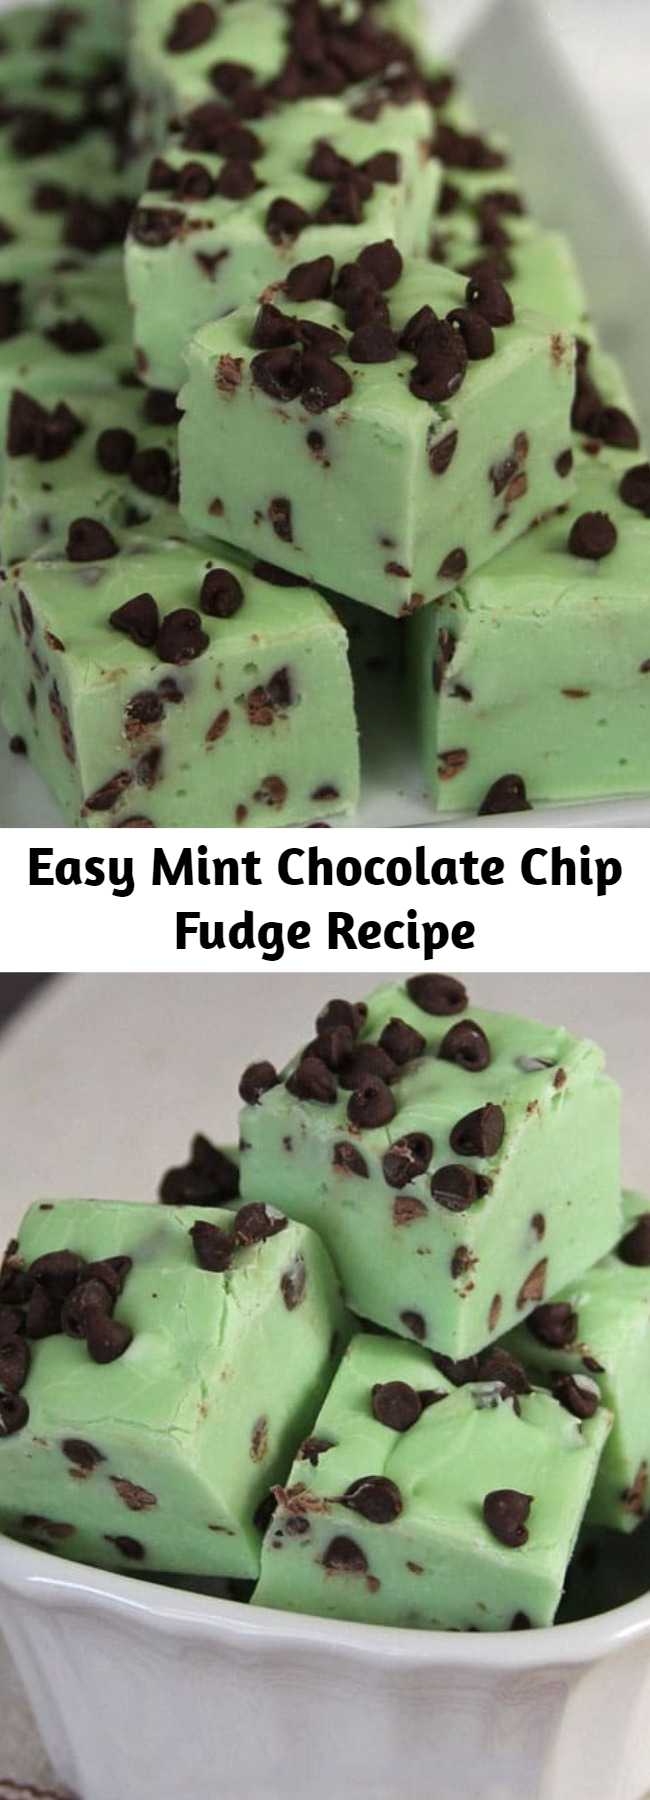 Easy Mint Chocolate Chip Fudge Recipe - Mint Chocolate Chip Fudge-same great taste you love as ice cream in a creamy melt in your mouth fudge!